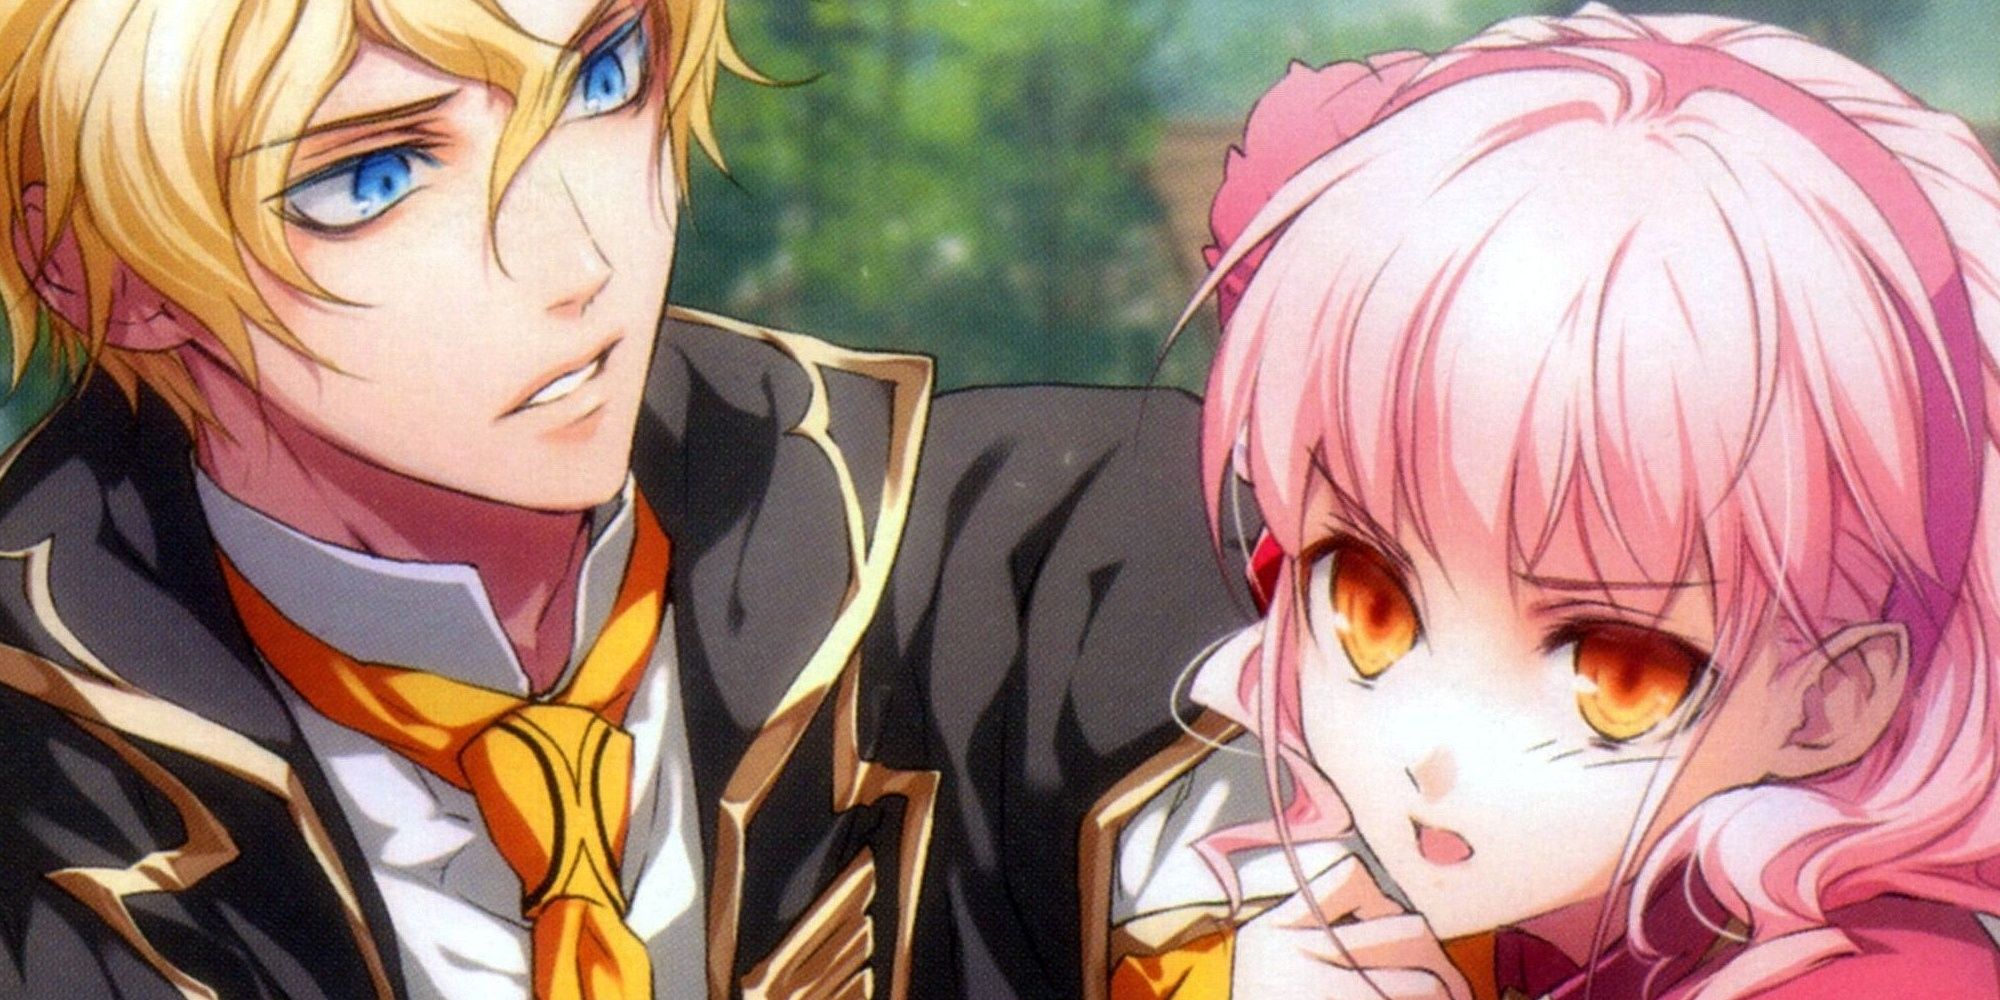 Noel and Lulu from otome visual novelWand Of Fortune R, appearing surprised and alarmed